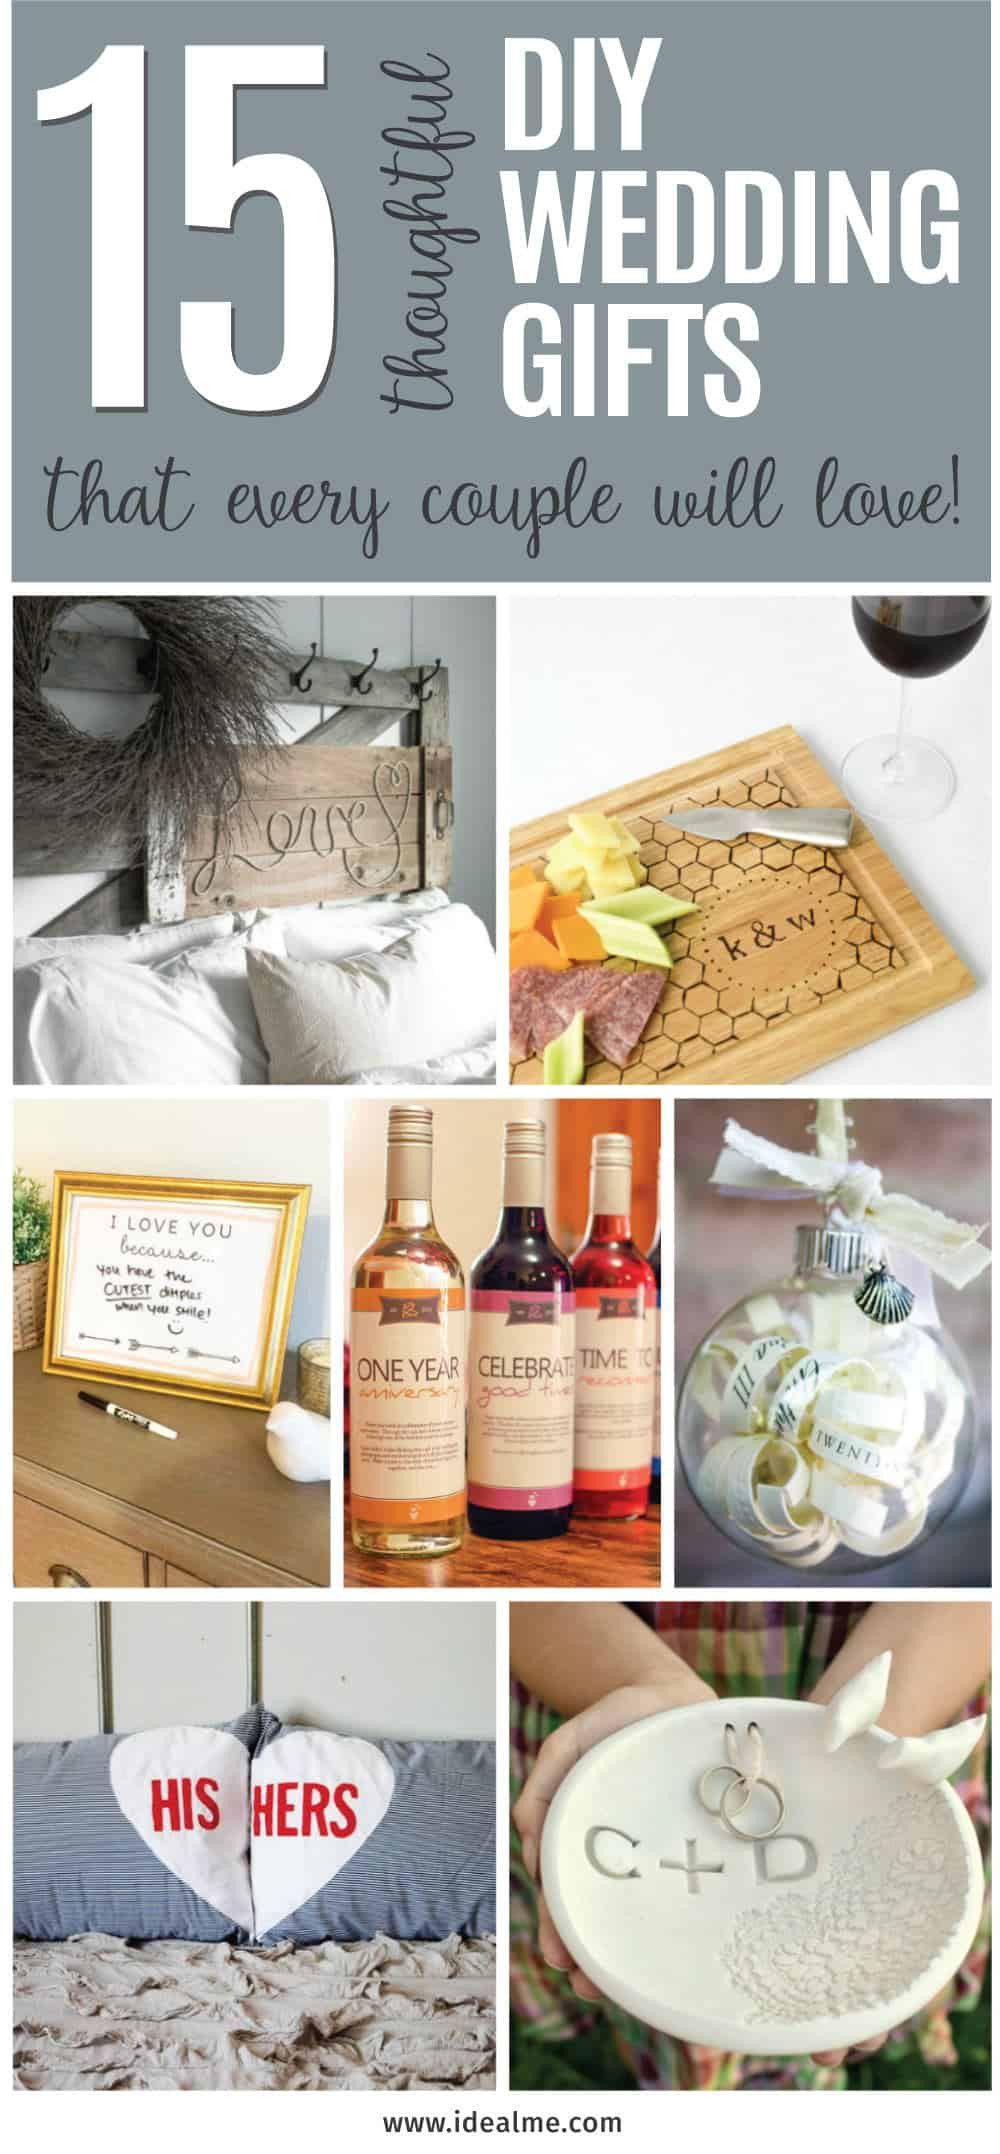 DIY Wedding Gift Baskets
 15 Thoughtful DIY Wedding Gifts that Every Couple Will